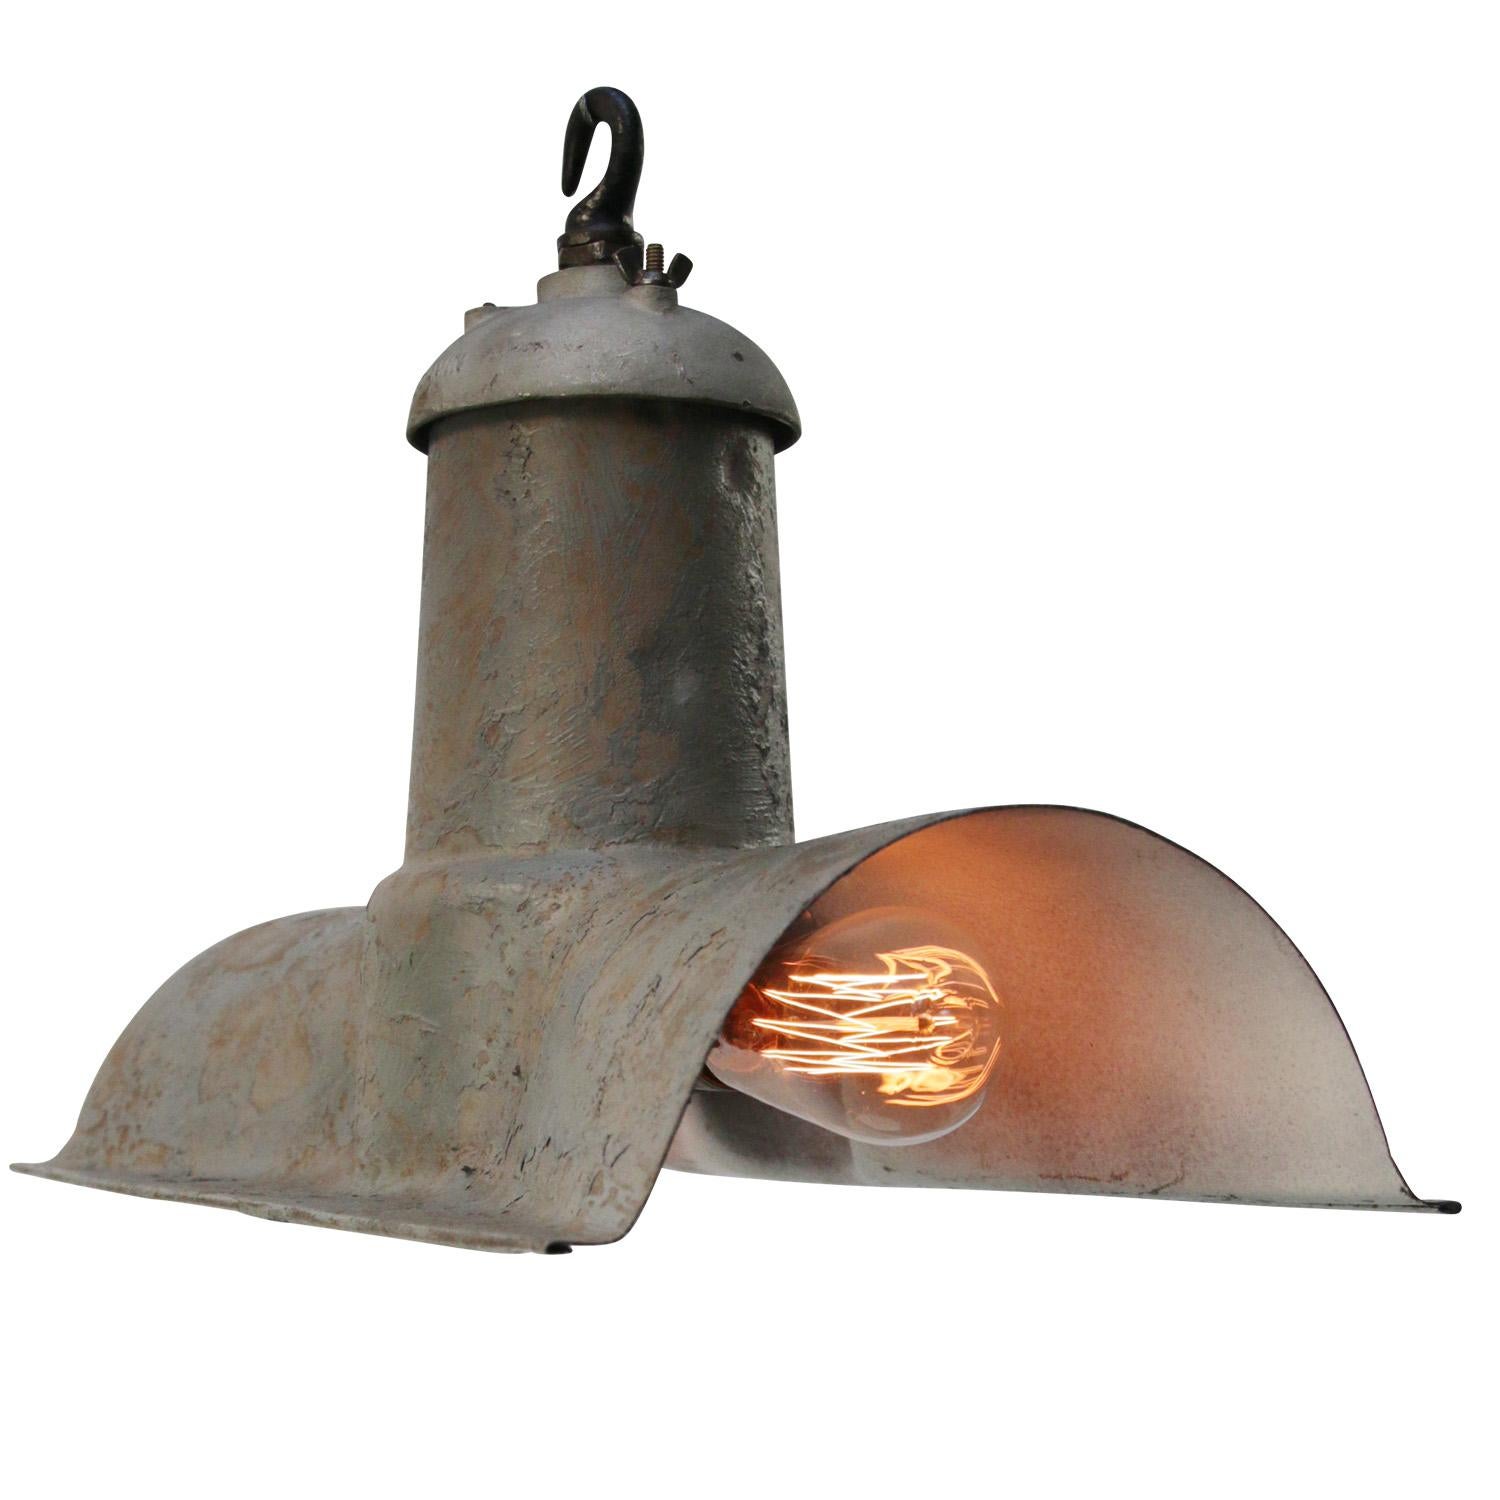 British metal industrial pendant light by Benjamin, UK

Double bulb holder 2x E26 / E27

Weight: 3.30 kg / 7.3 lb

Priced per individual item. All lamps have been made suitable by international standards for incandescent light bulbs,